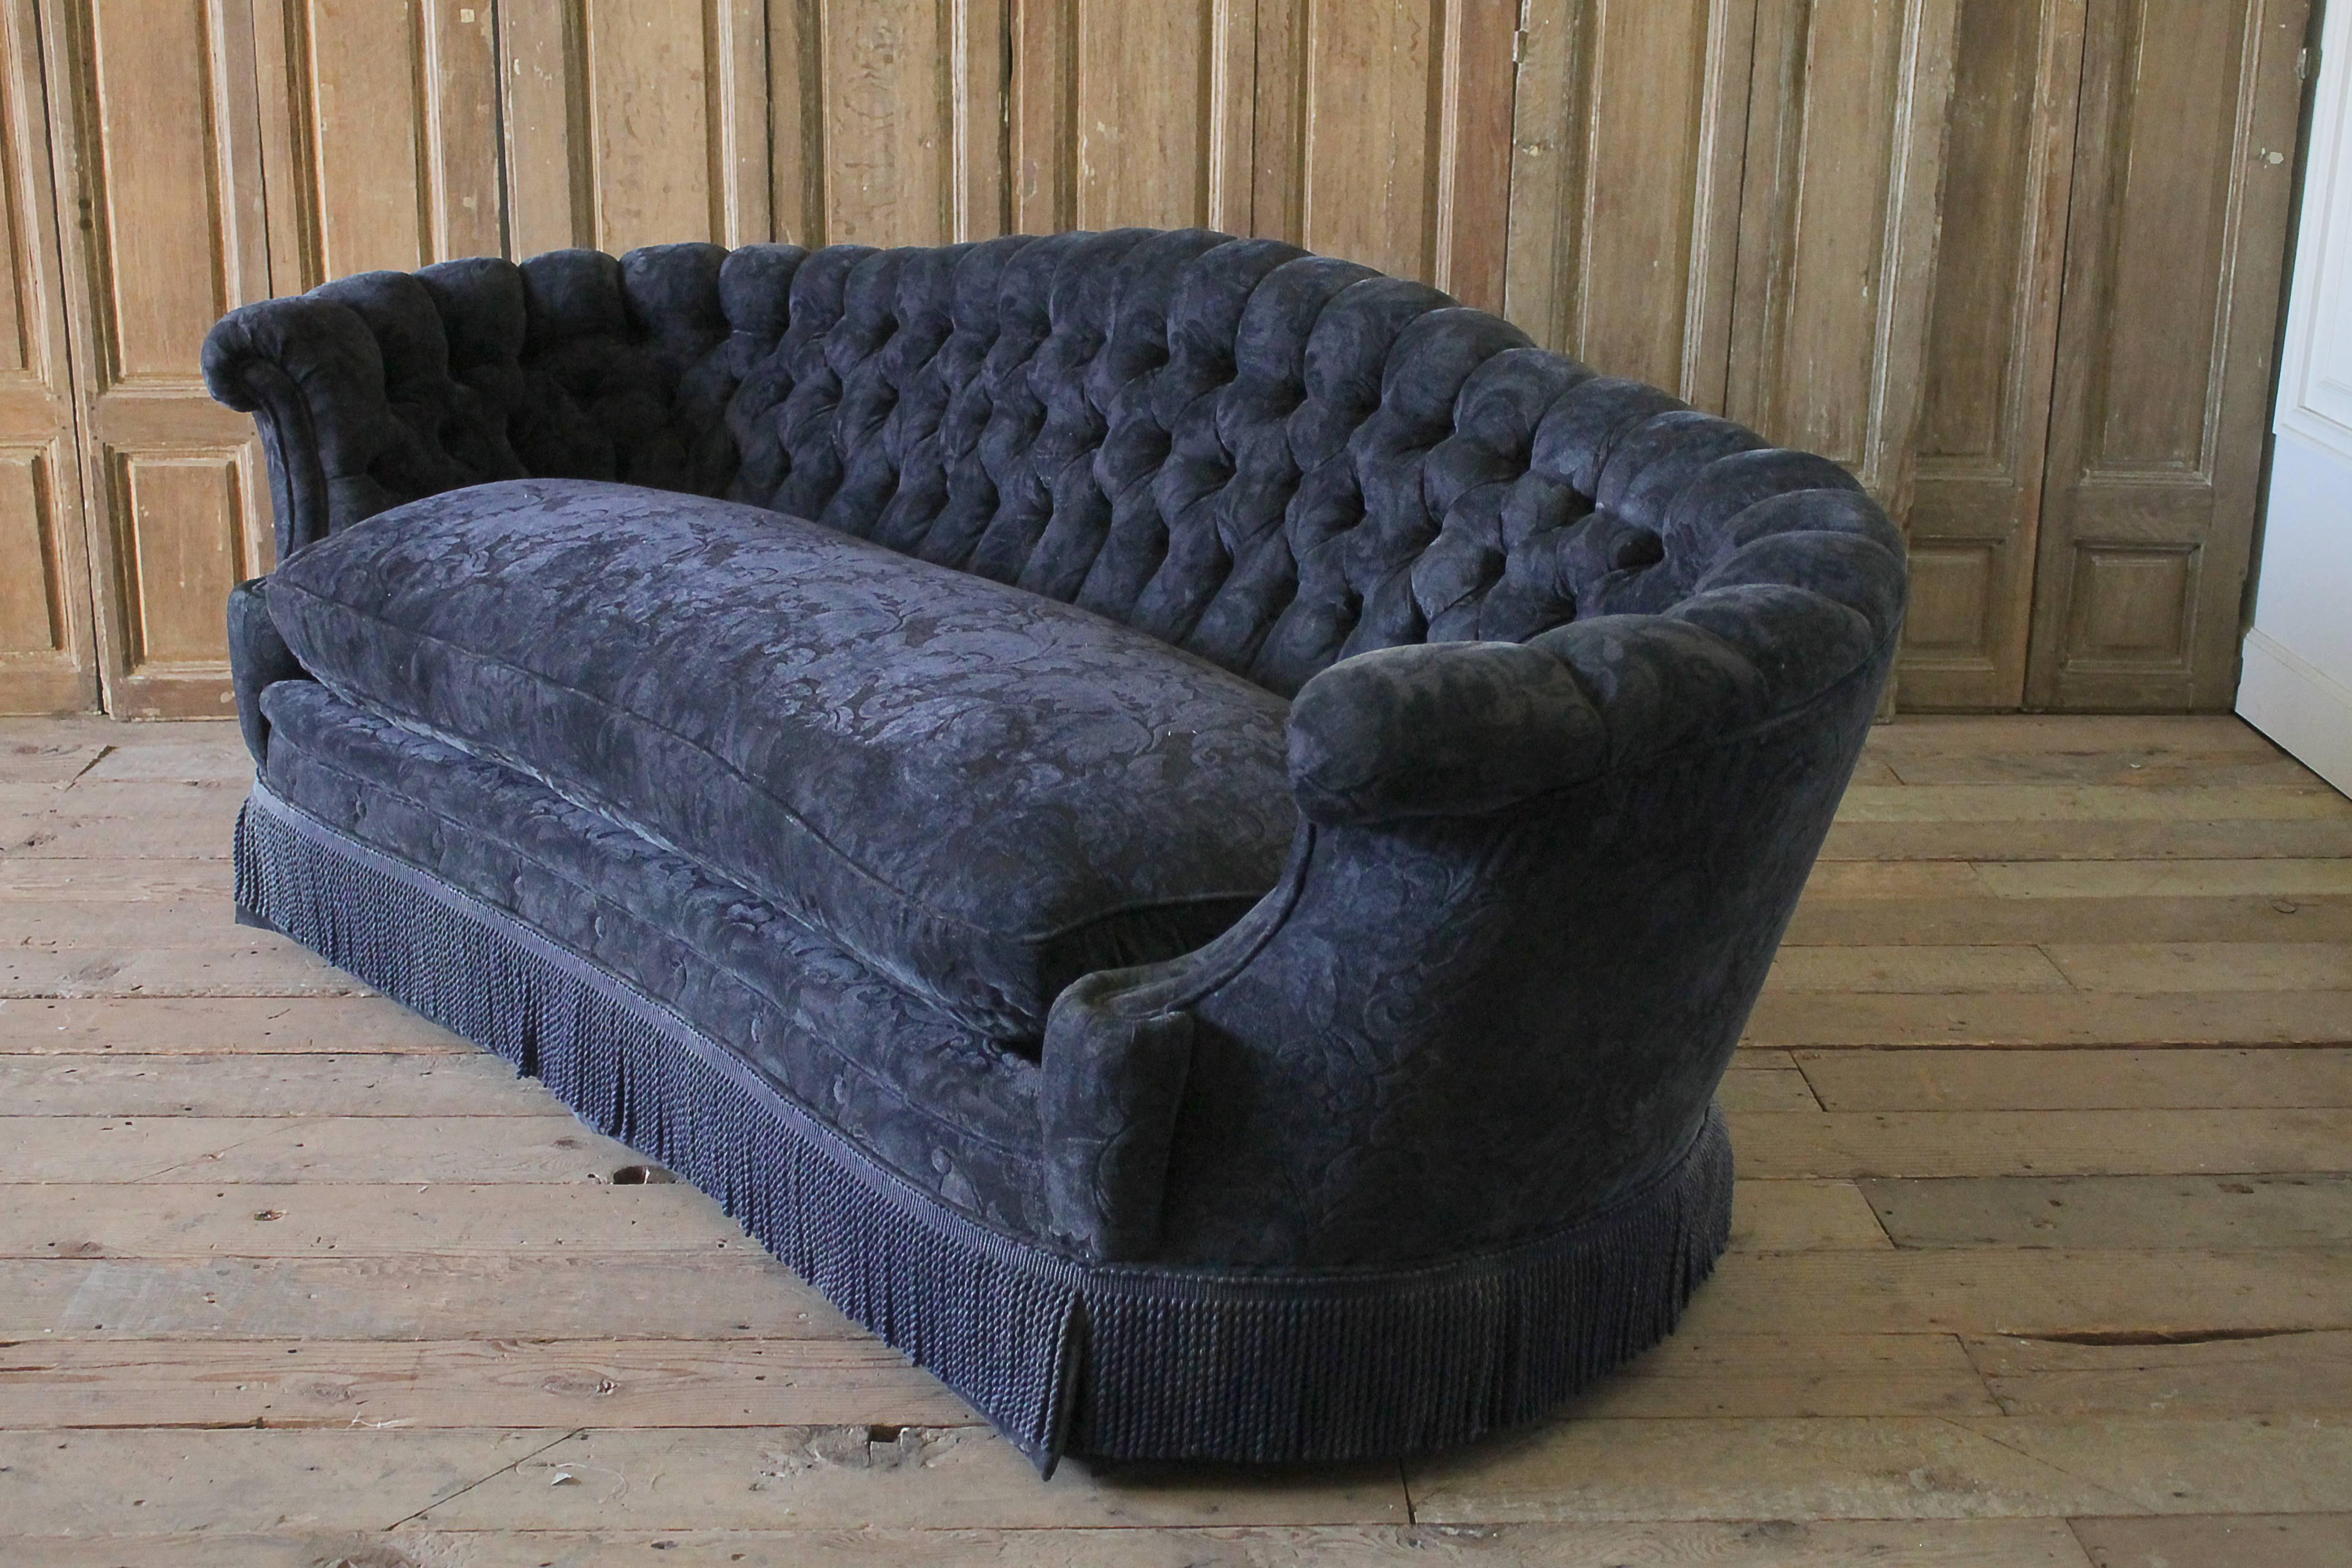 Wood Vintage Button Tufted Victorian Style Sofa